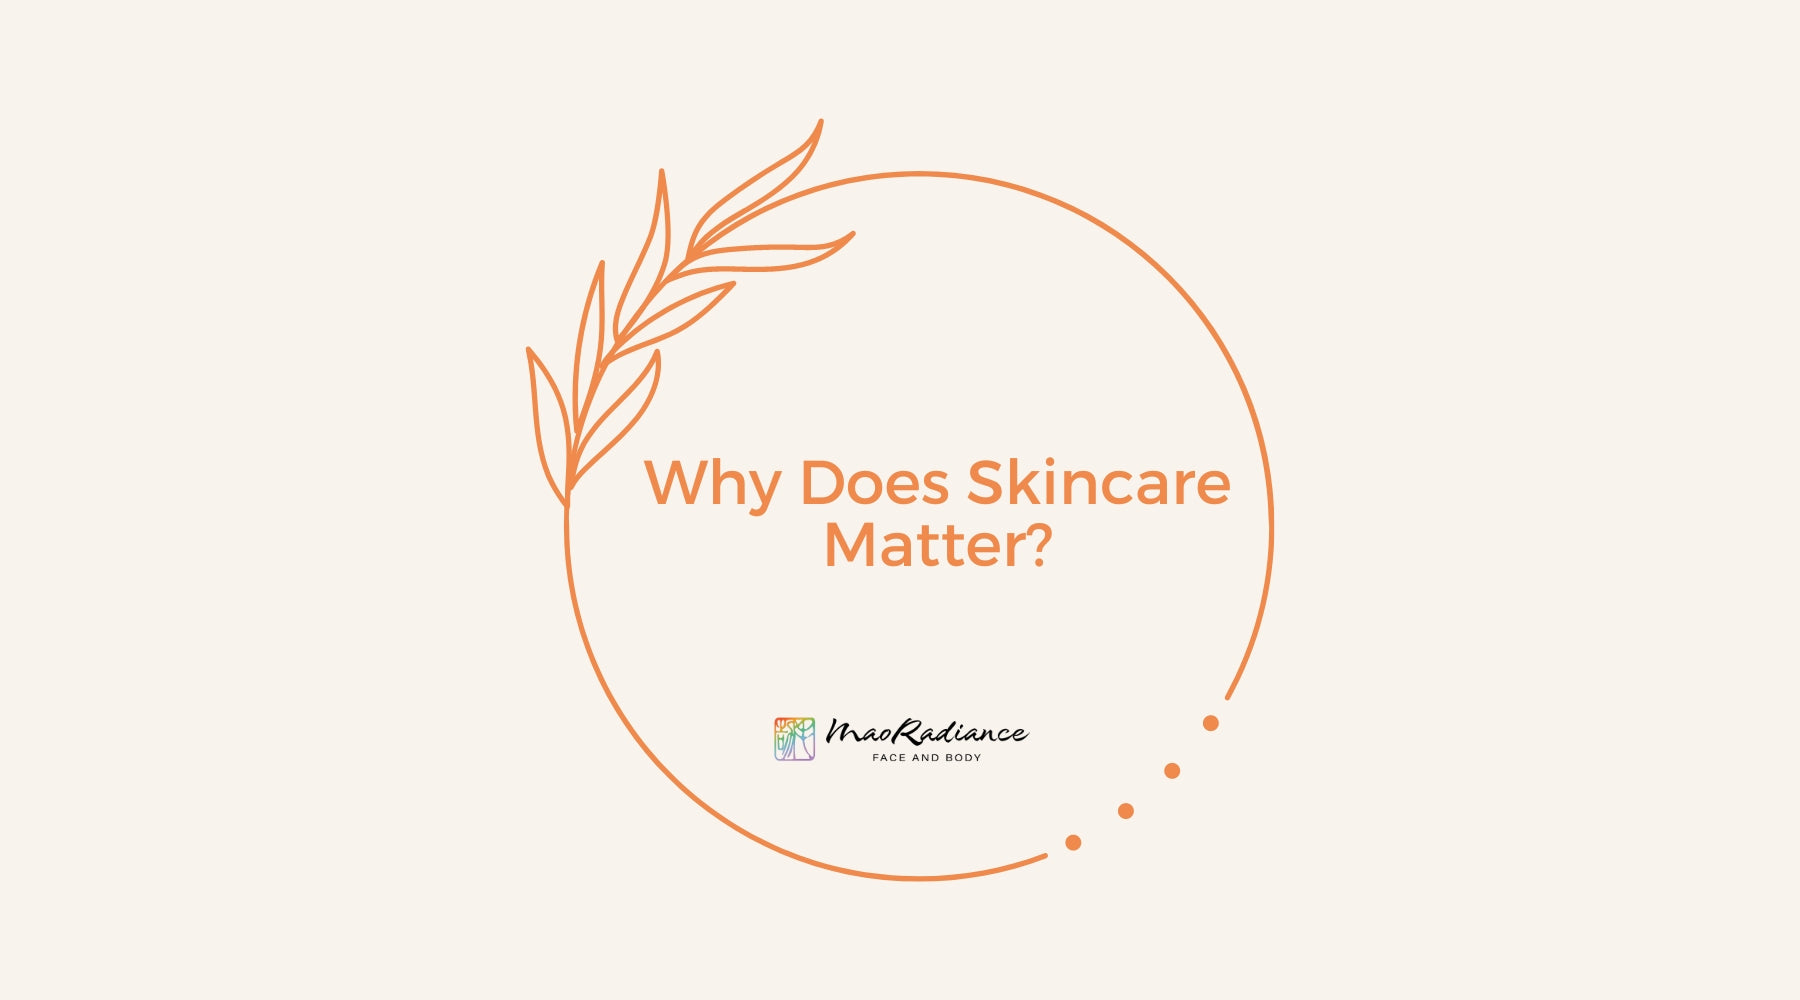 Why Does Skincare Matter?